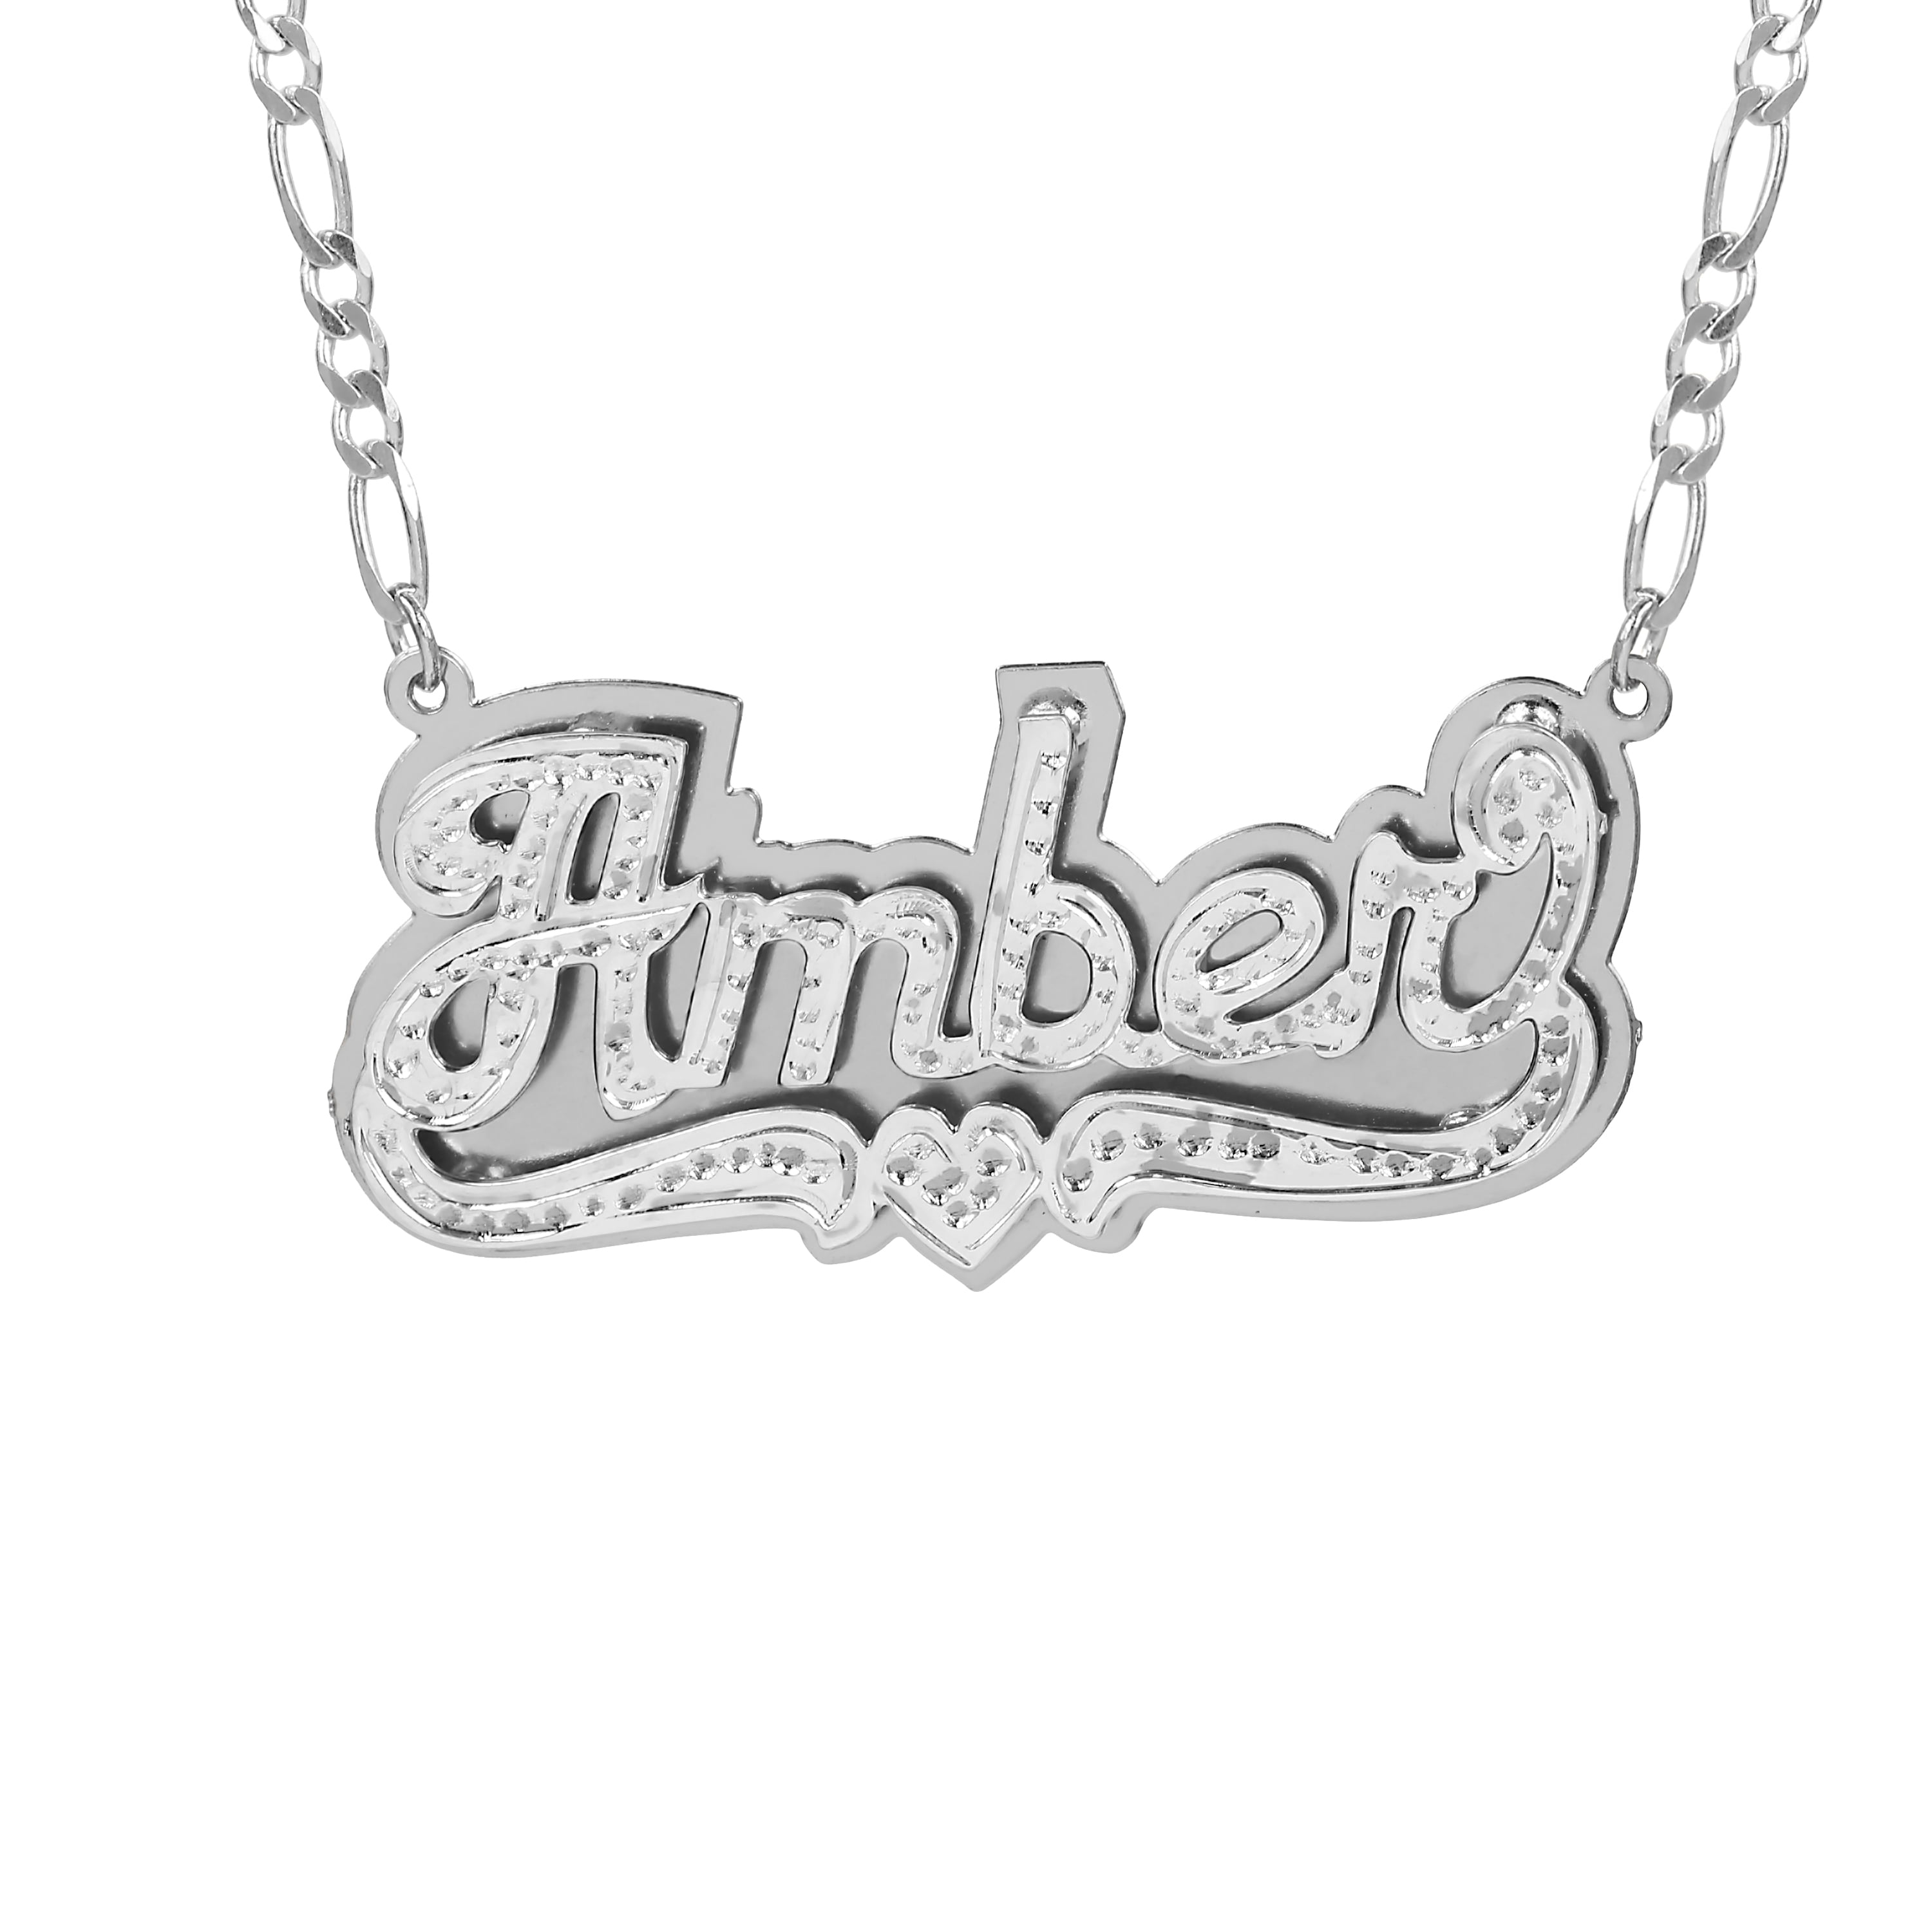 Jay Aimee Designs Personalized Sterling Silver Or Gold Plated